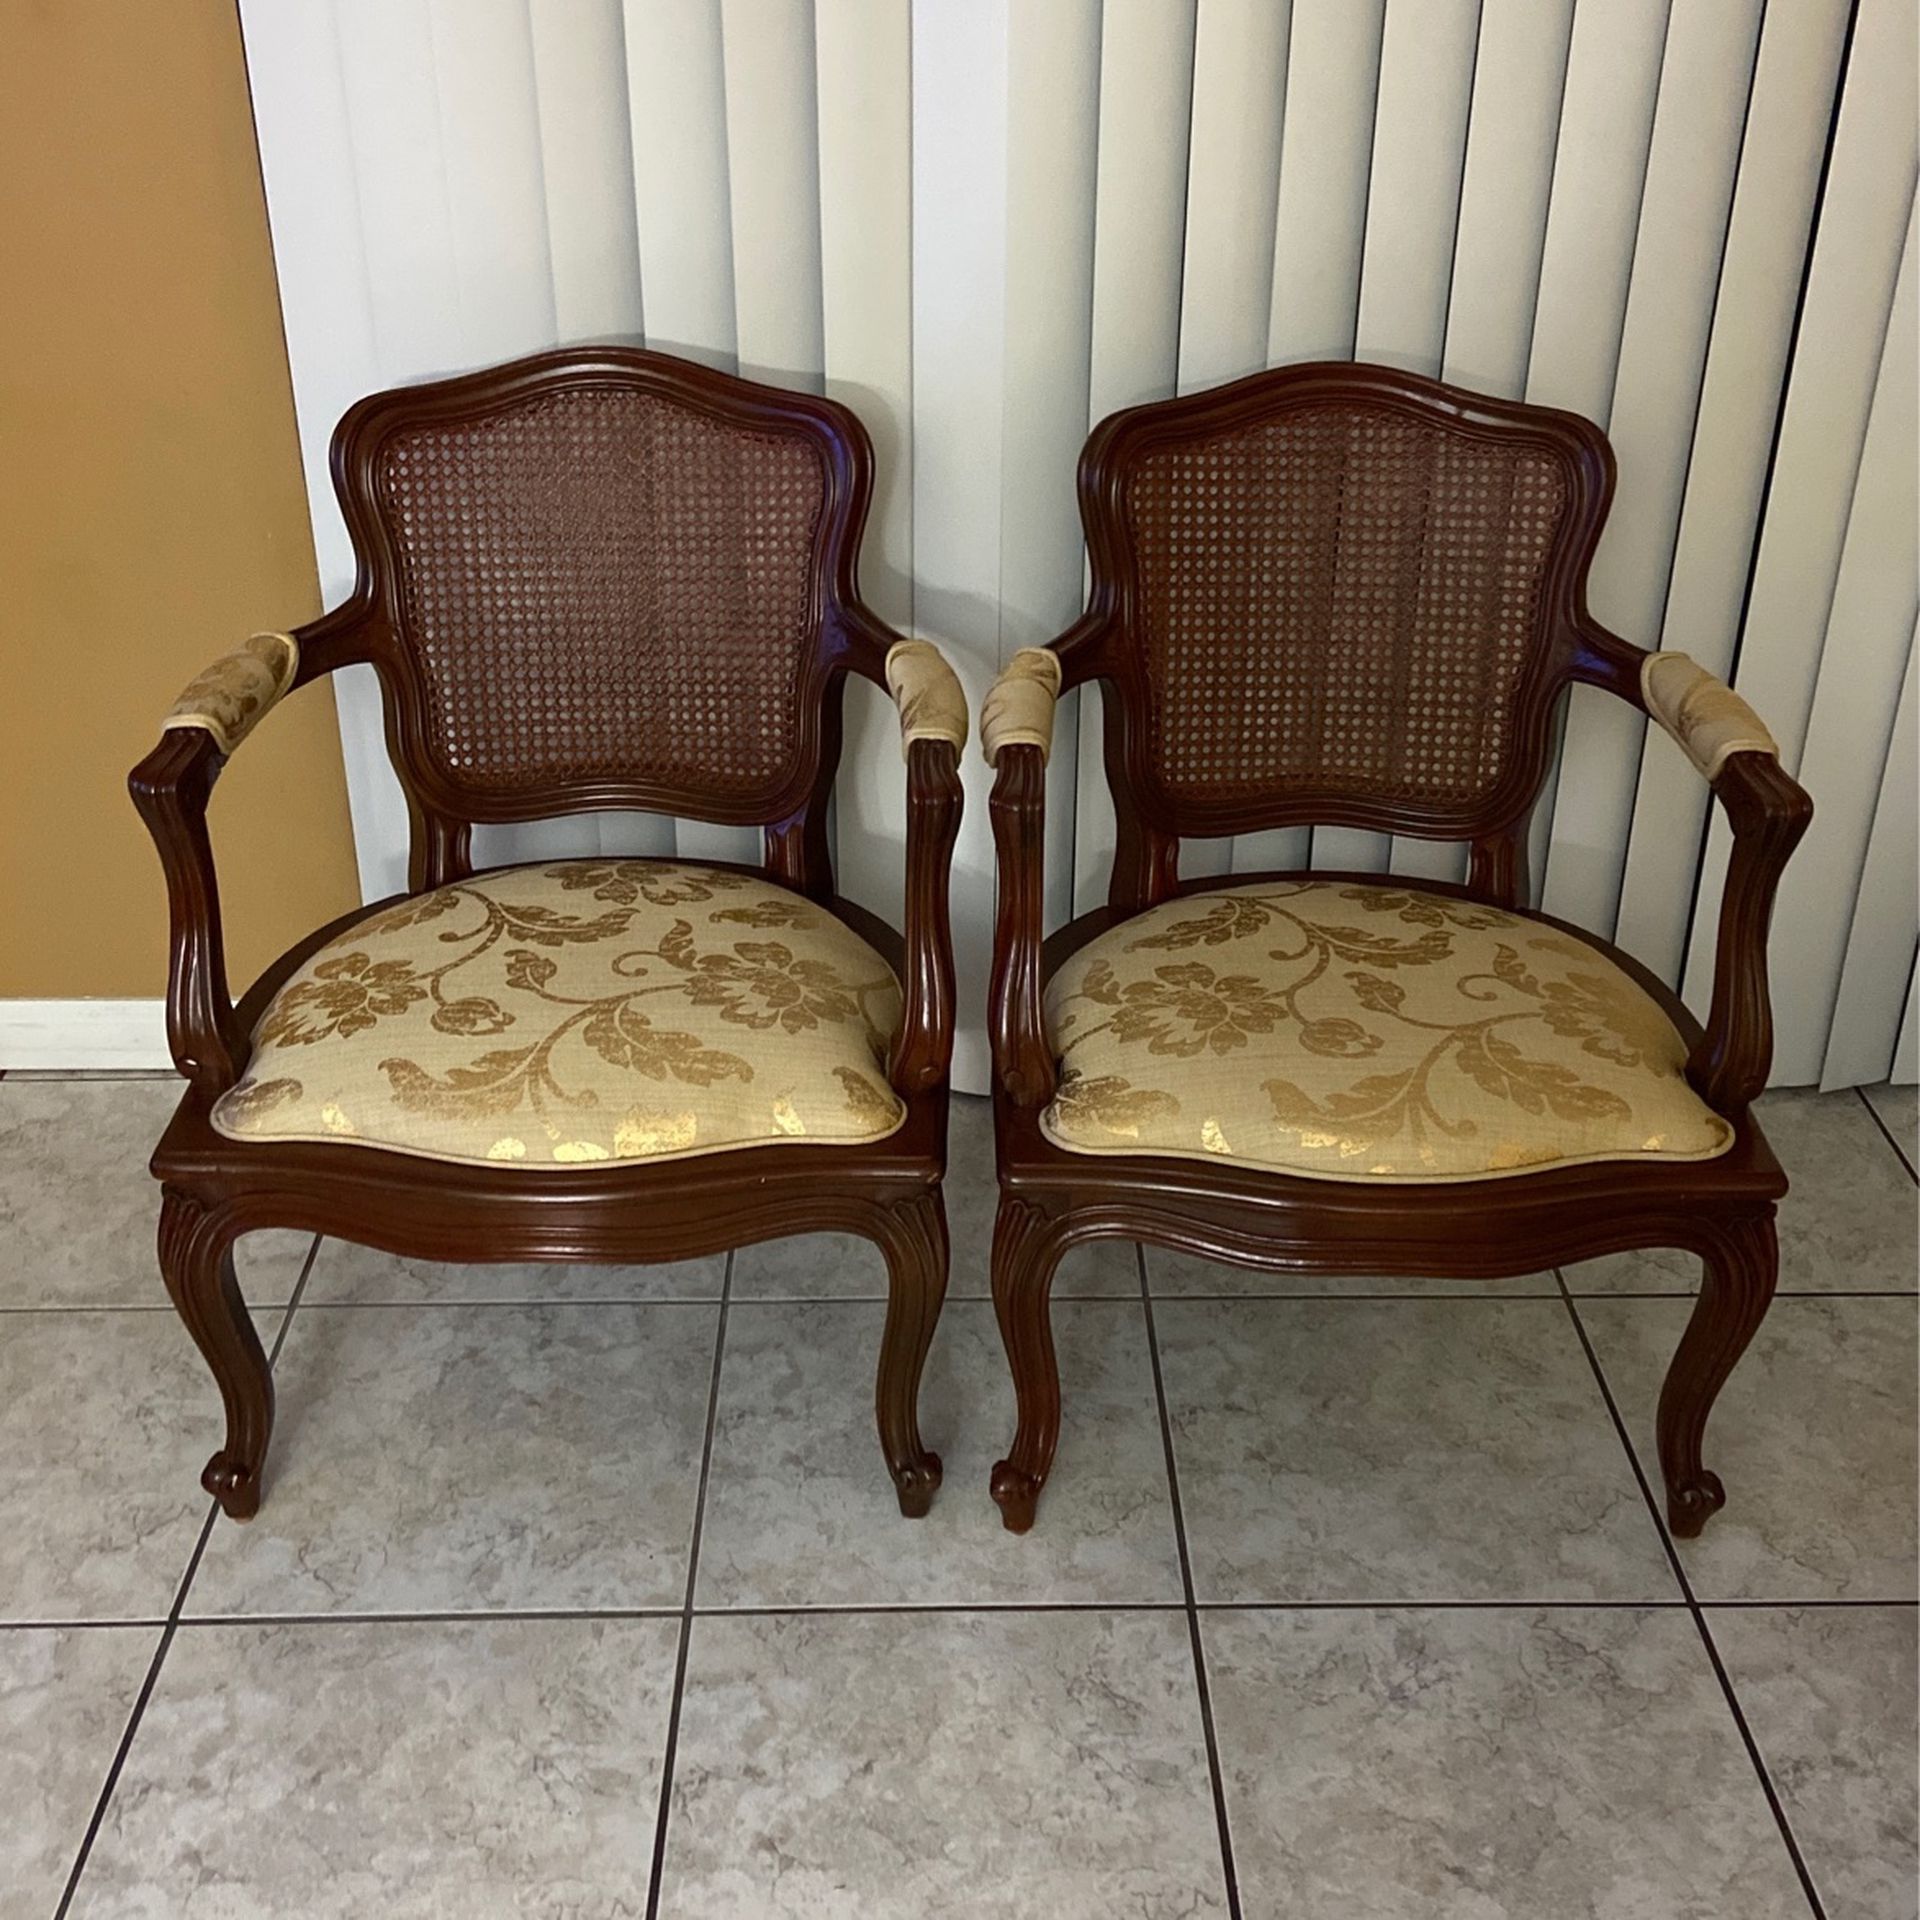 Two pairs of chair Louis XV from Italy